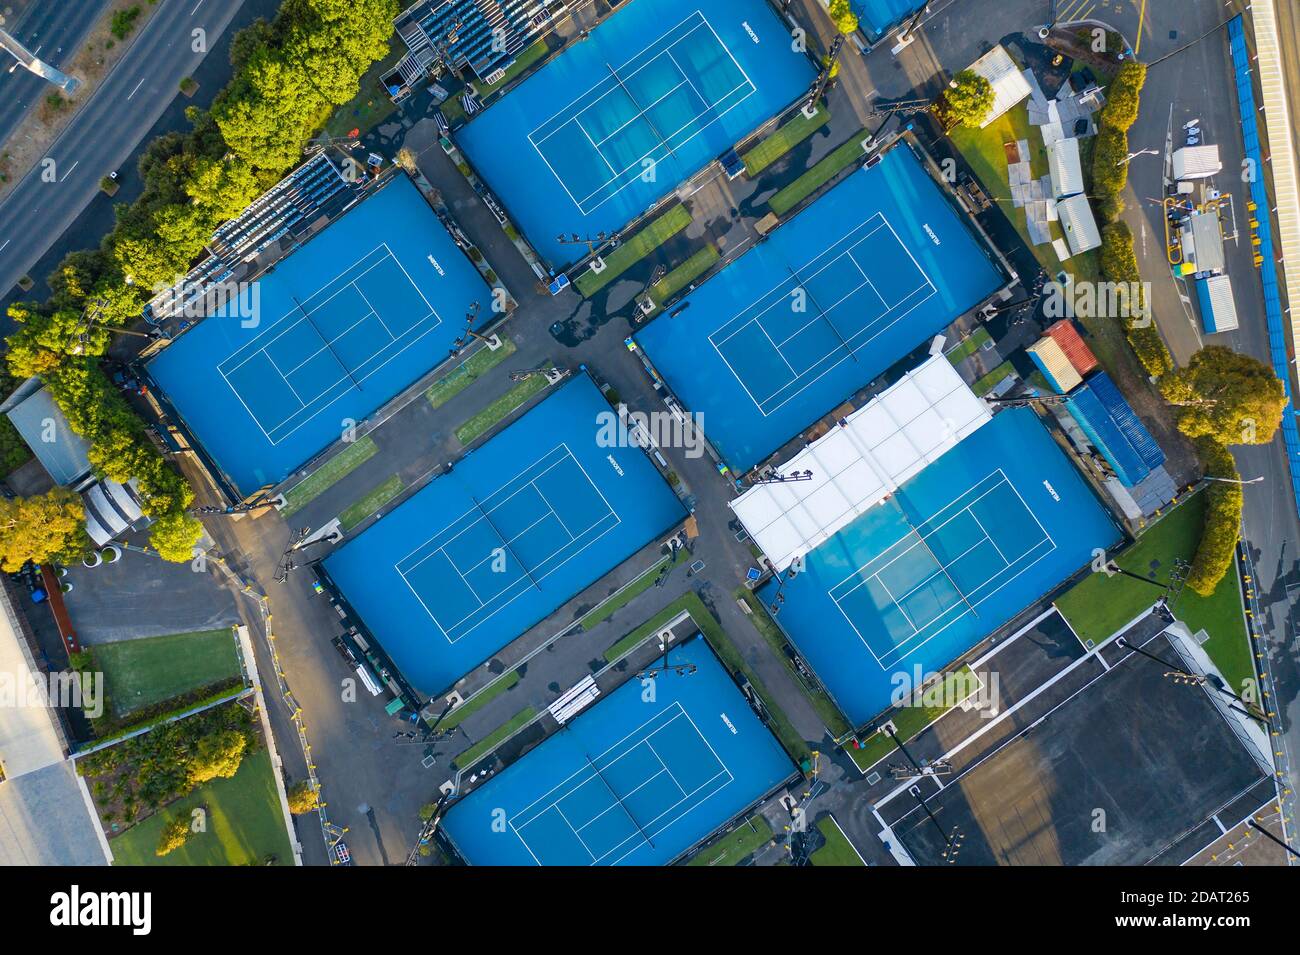 Aerial top down view of tennis courts in Melbourne Park Stock Photo